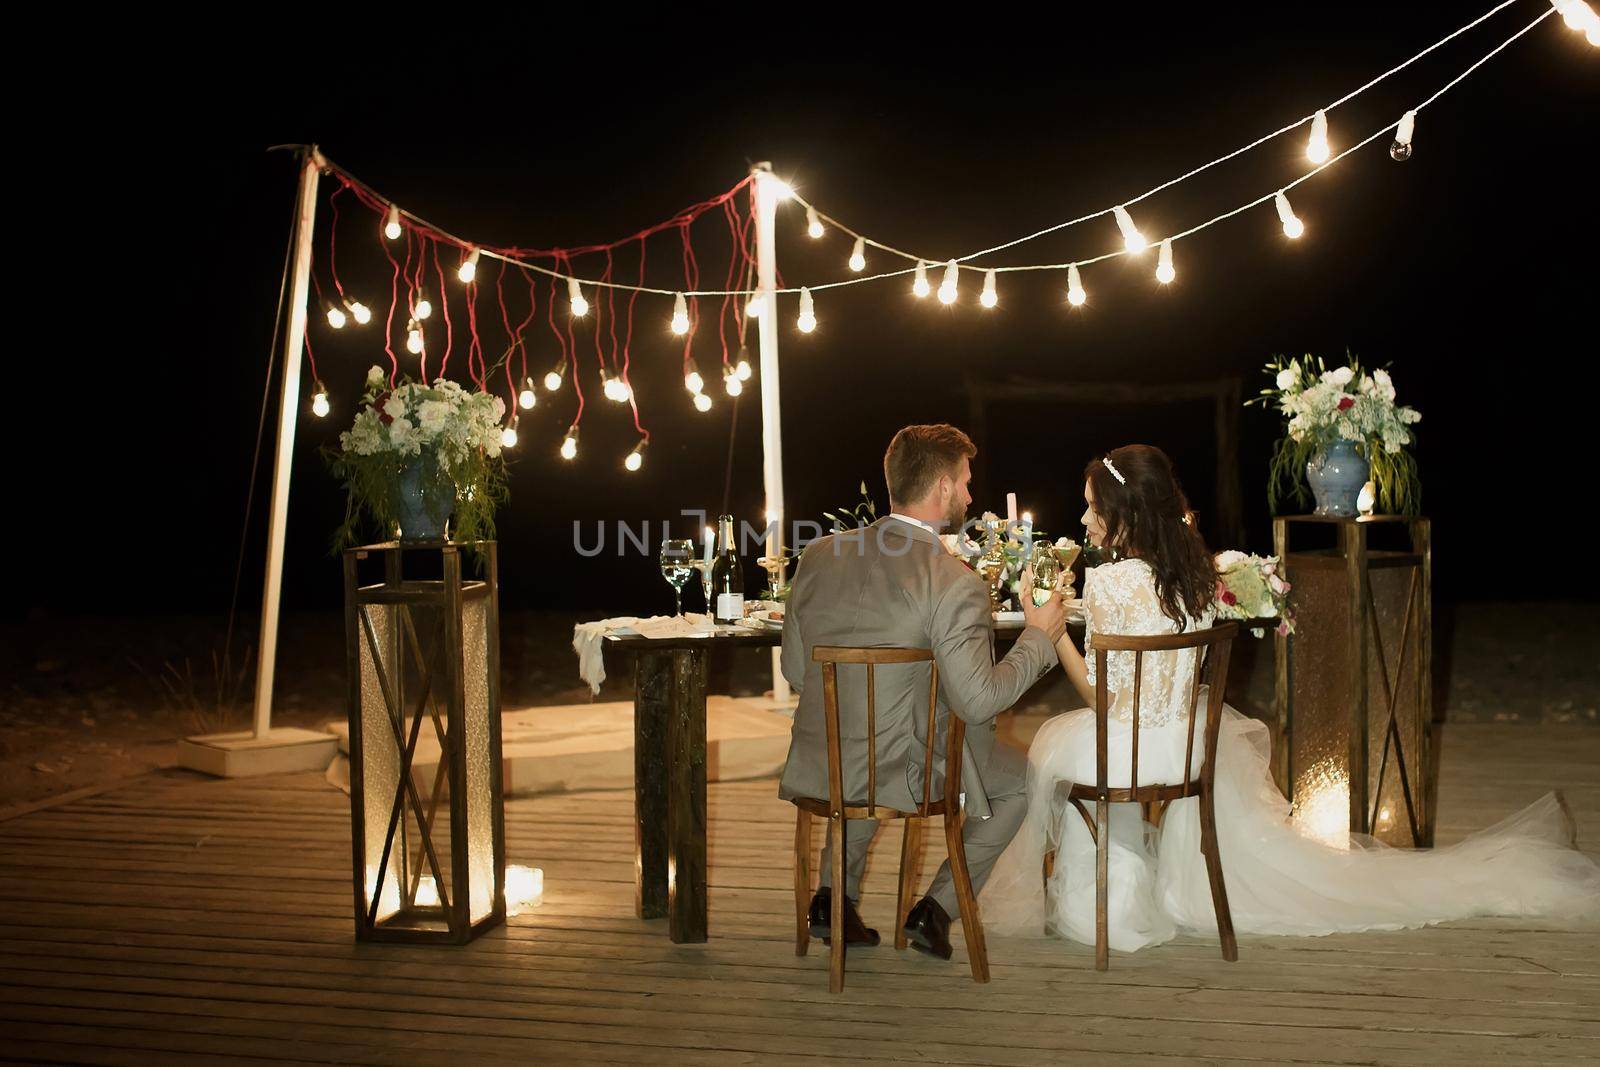 The night wedding ceremony. The bride and groom are sitting at the festive table. Banquet. by StudioPeace